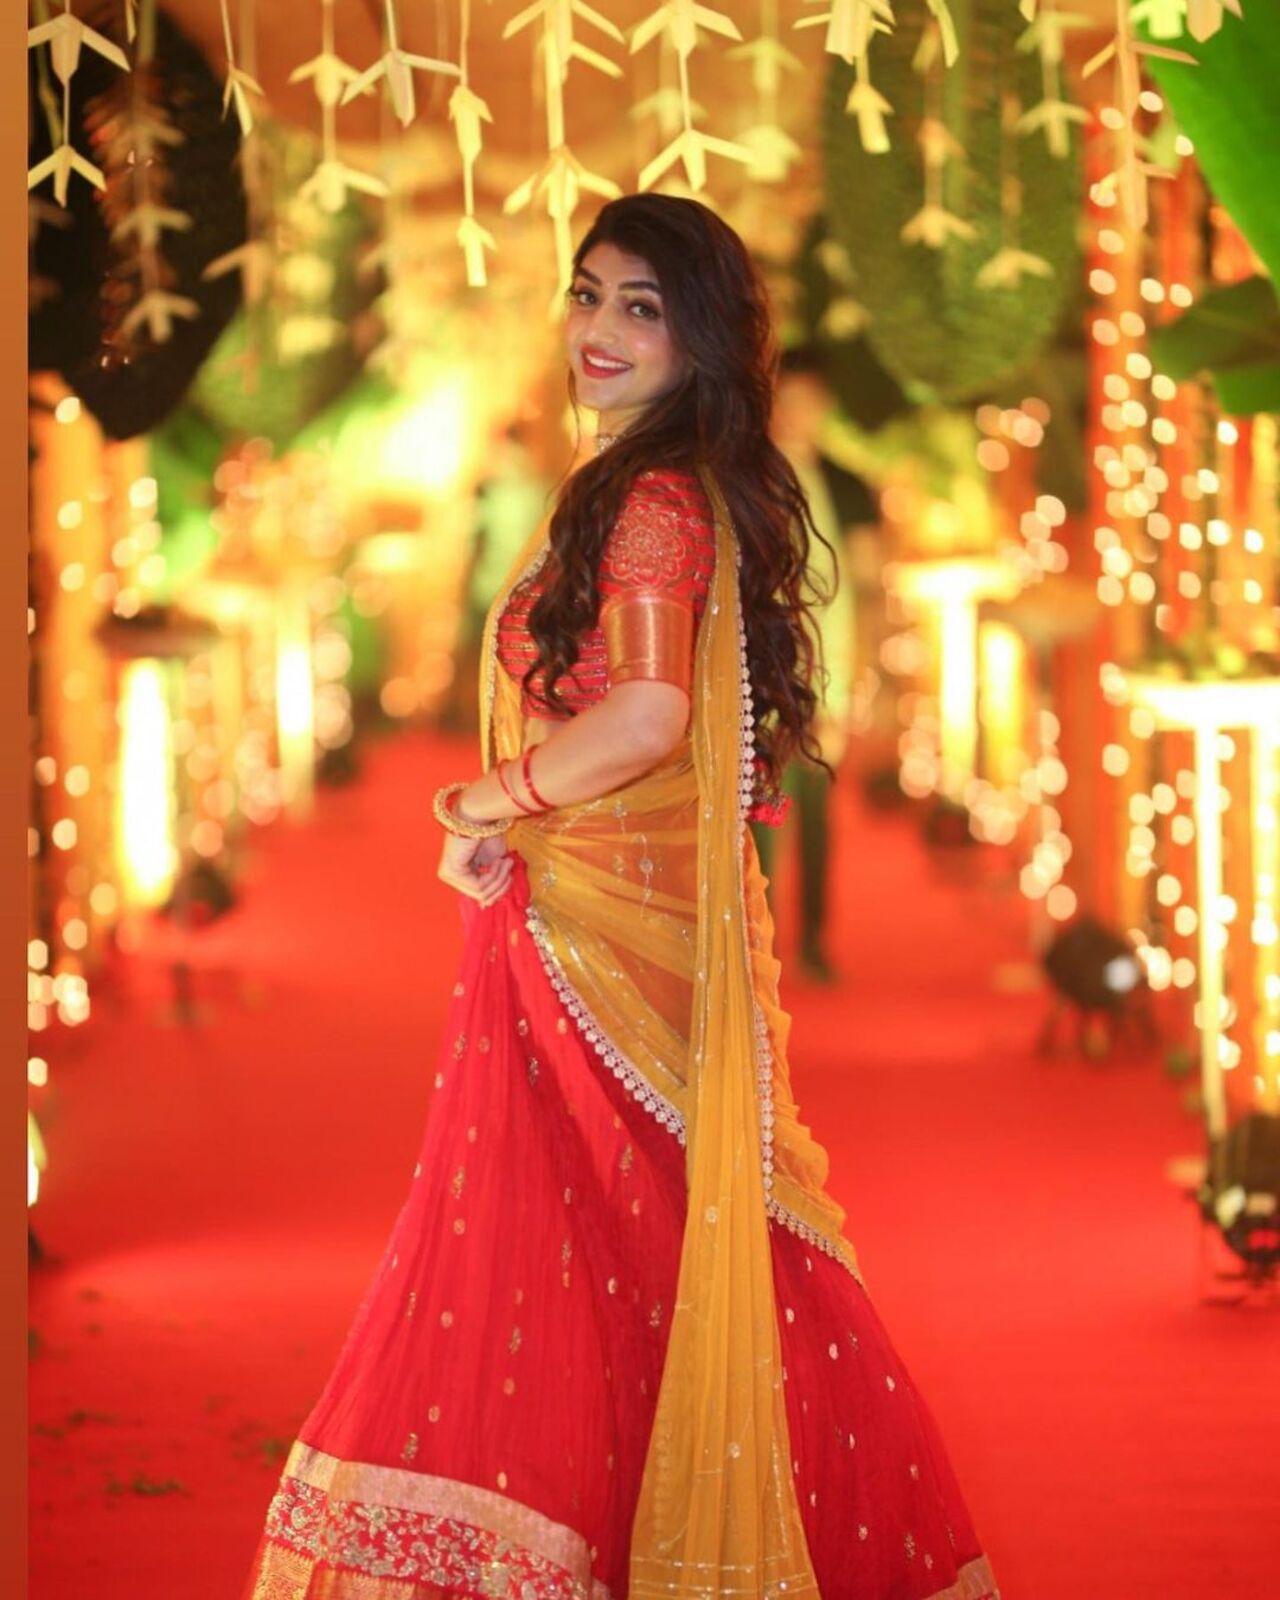 Sreeleela shows the way in acing a half-saree. Opt for a flowy red skirt paired with a yellow dupatta that it will give off the ultimate festive vibes